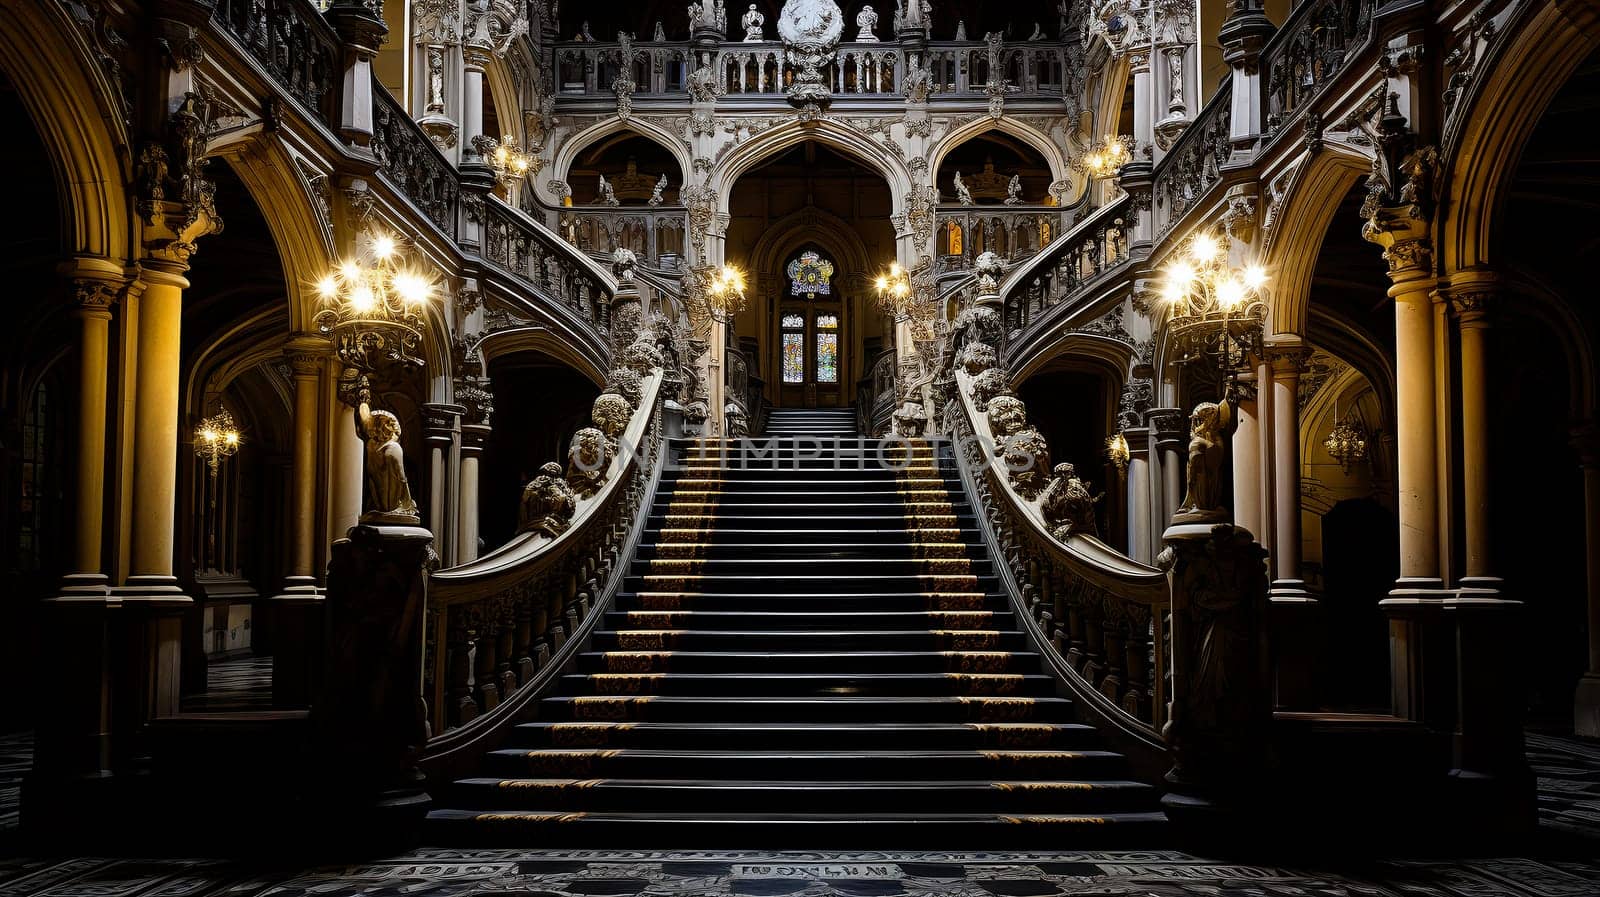 Elegant Grand Staircase in Luxurious Interior by chrisroll